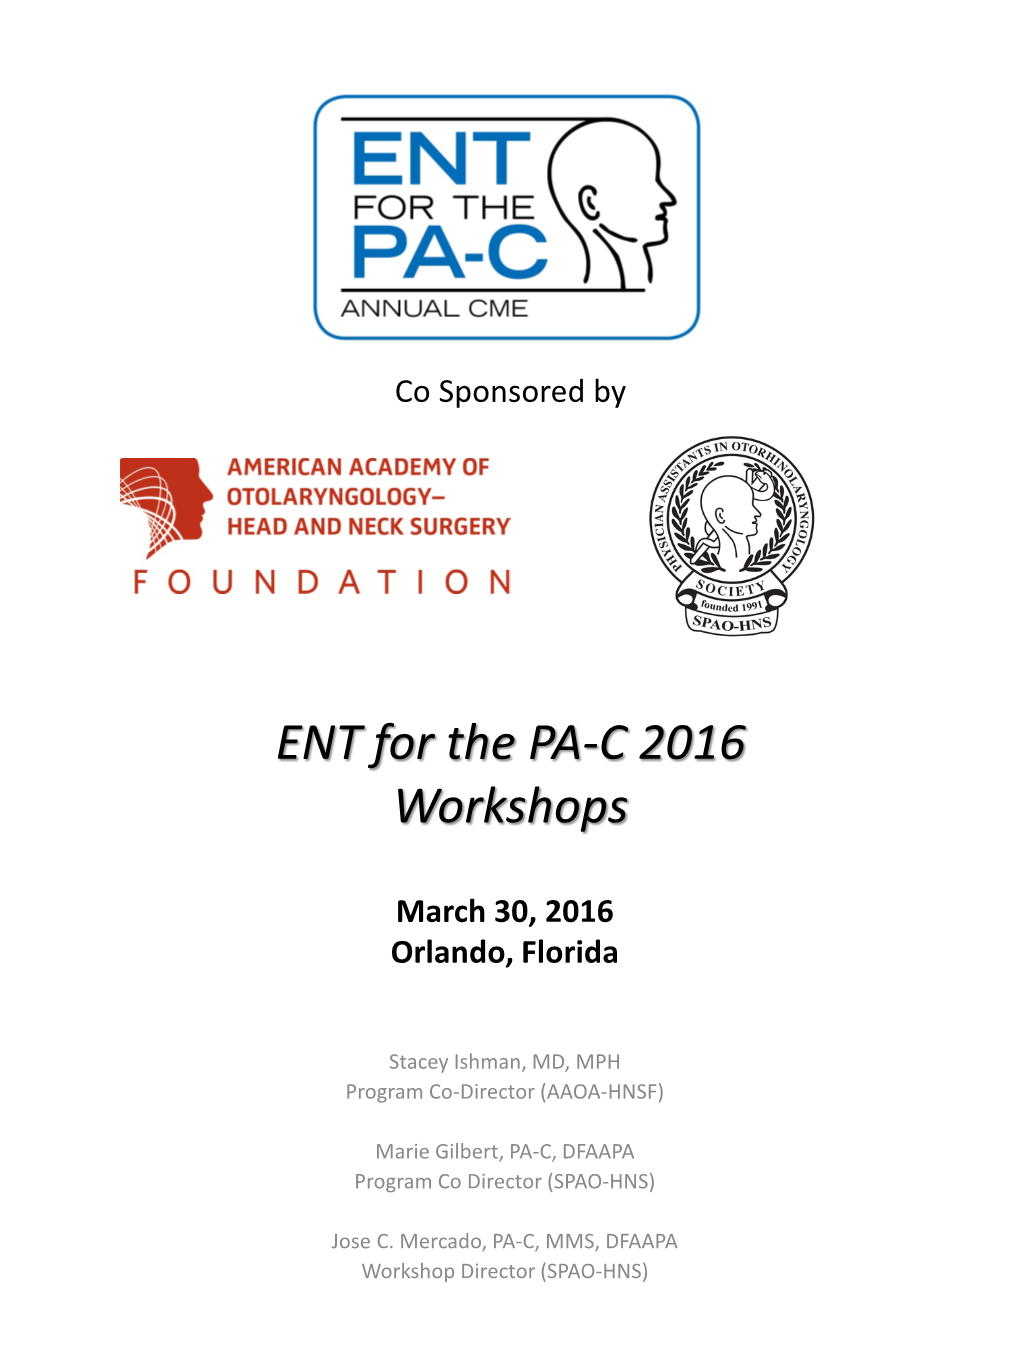 ENT for the PA-C 2014 Workshops